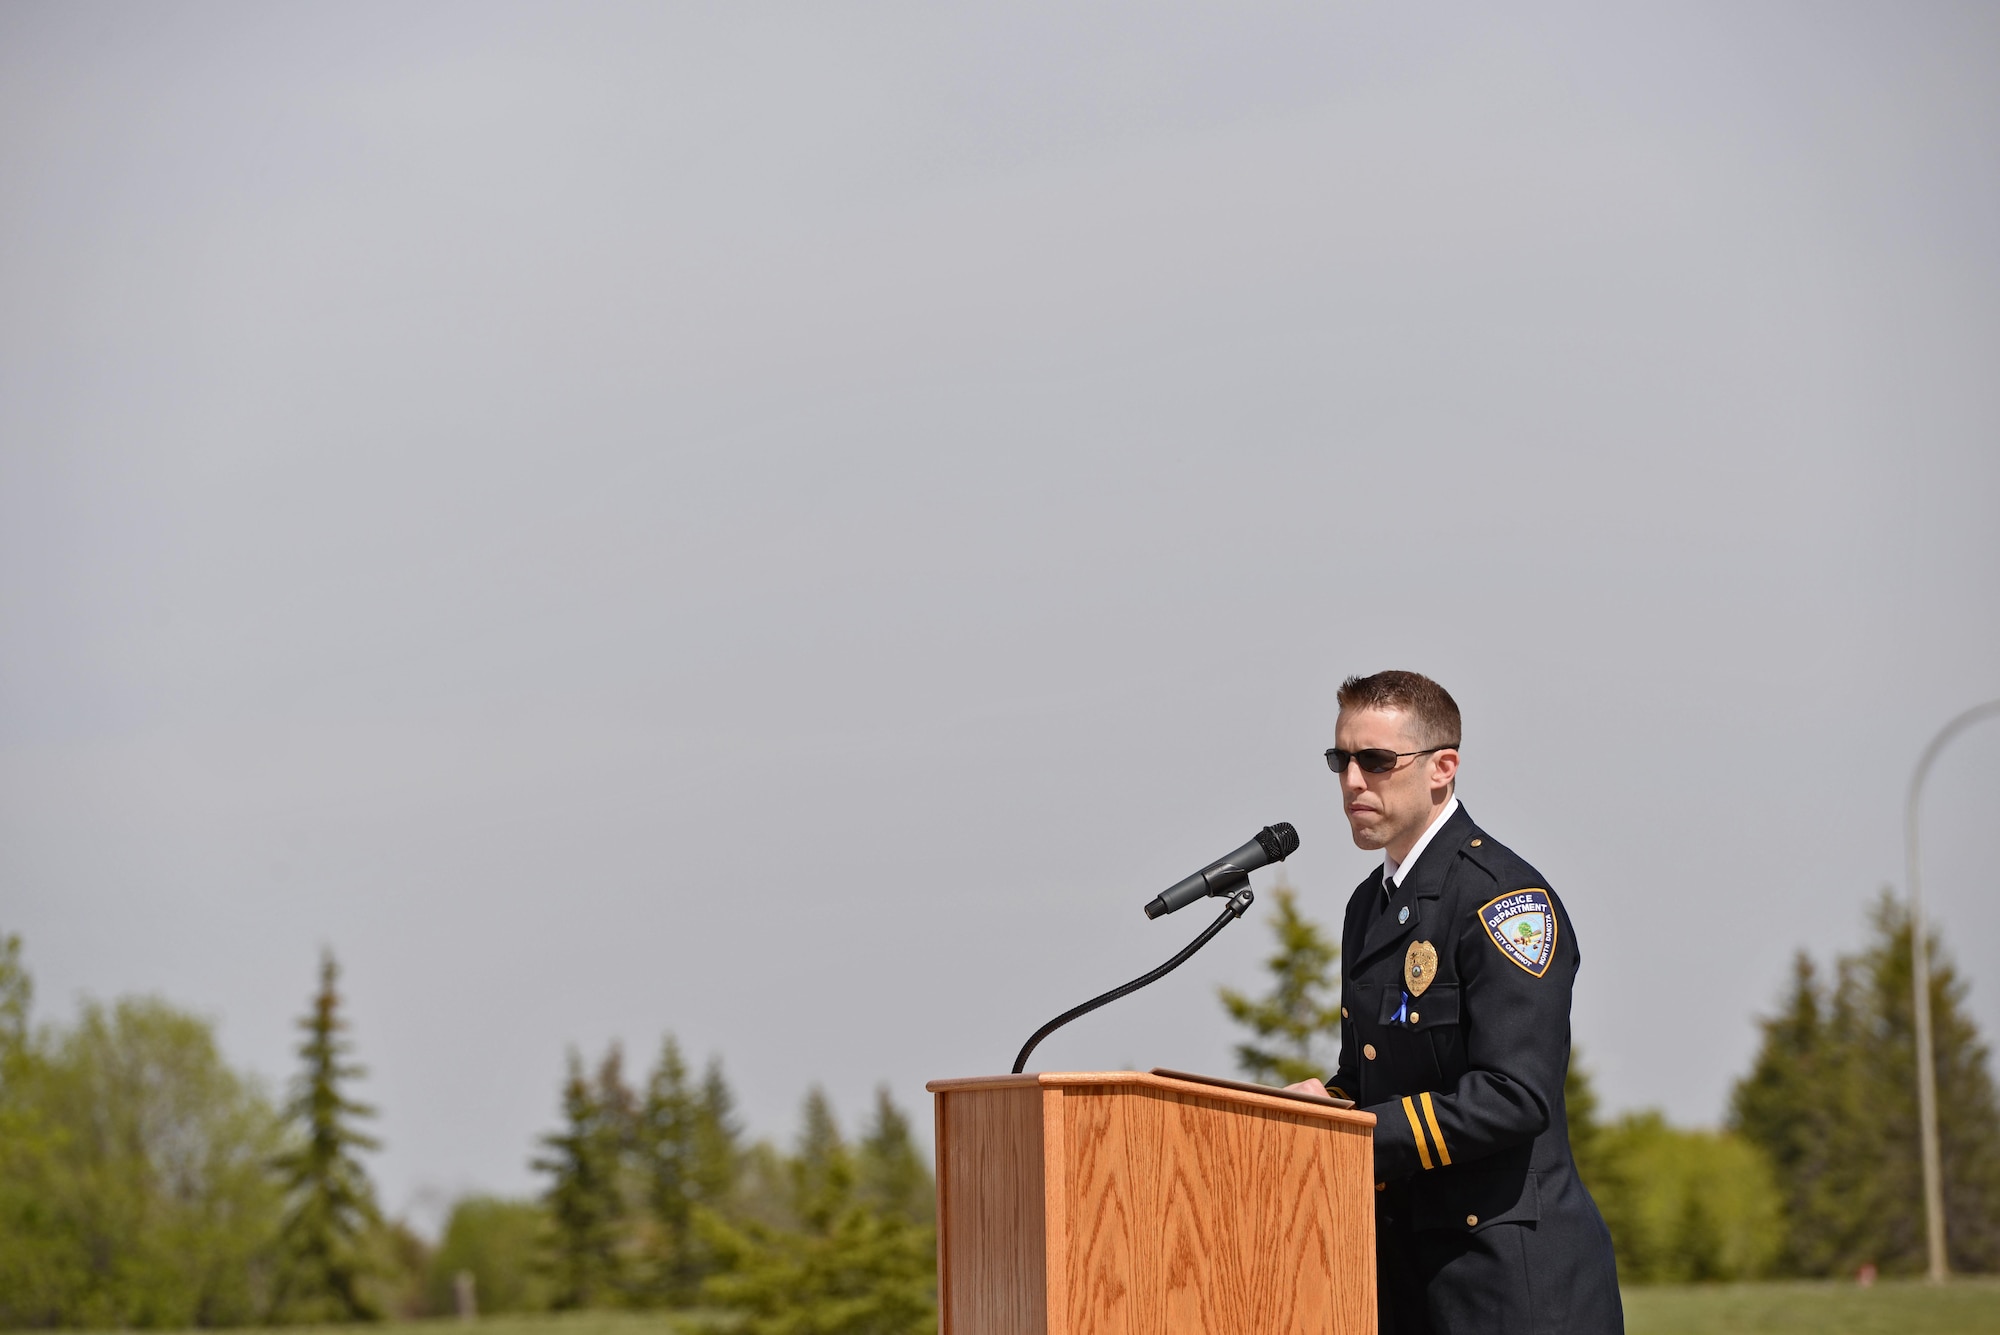 Police Officer Justin Sundheim, captain of the Minot Police Department, recites fallen officers’ names at the National Police Week retreat ceremony at Minot Air Force Base, N.D., May 19, 2017. Retreat is the last ceremony of National Police Week. (U.S. Air Force photo/Airman 1st Class Austin M. Thomas)